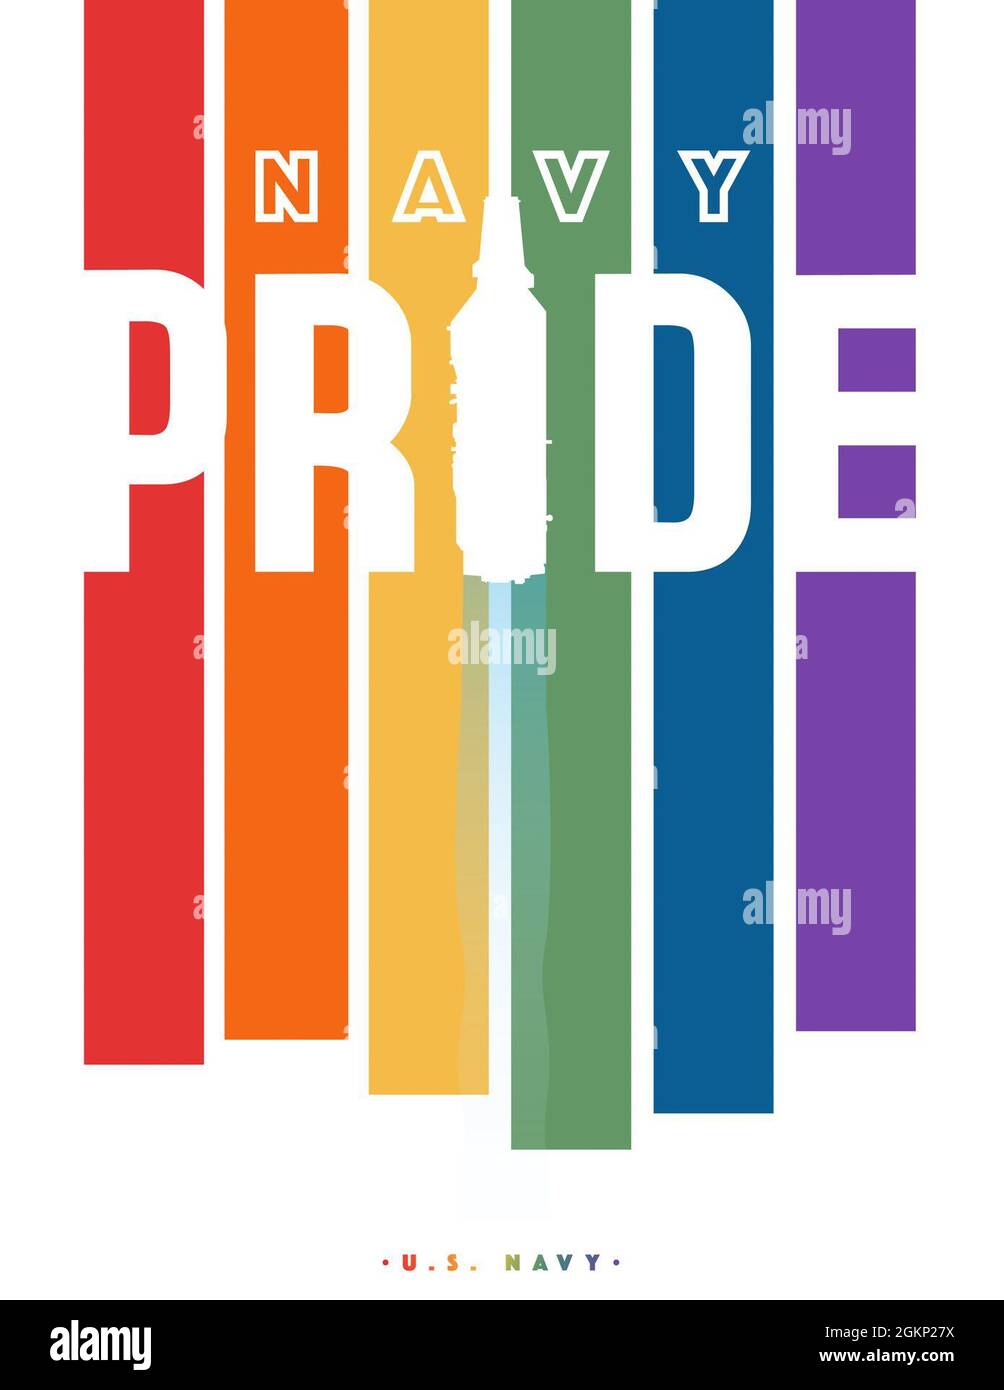 210610-N-BB269-1003 WASHINGTON (June 10, 2021) A digital graphic created for LGBTQ+ Pride Month. The words ‘Navy Pride’ are placed atop six colored bars forming a stylized rainbow. A silhouette of an aircraft carrier forms the letter 'I' in 'Pride' representing the service of our Sailors. Stock Photo